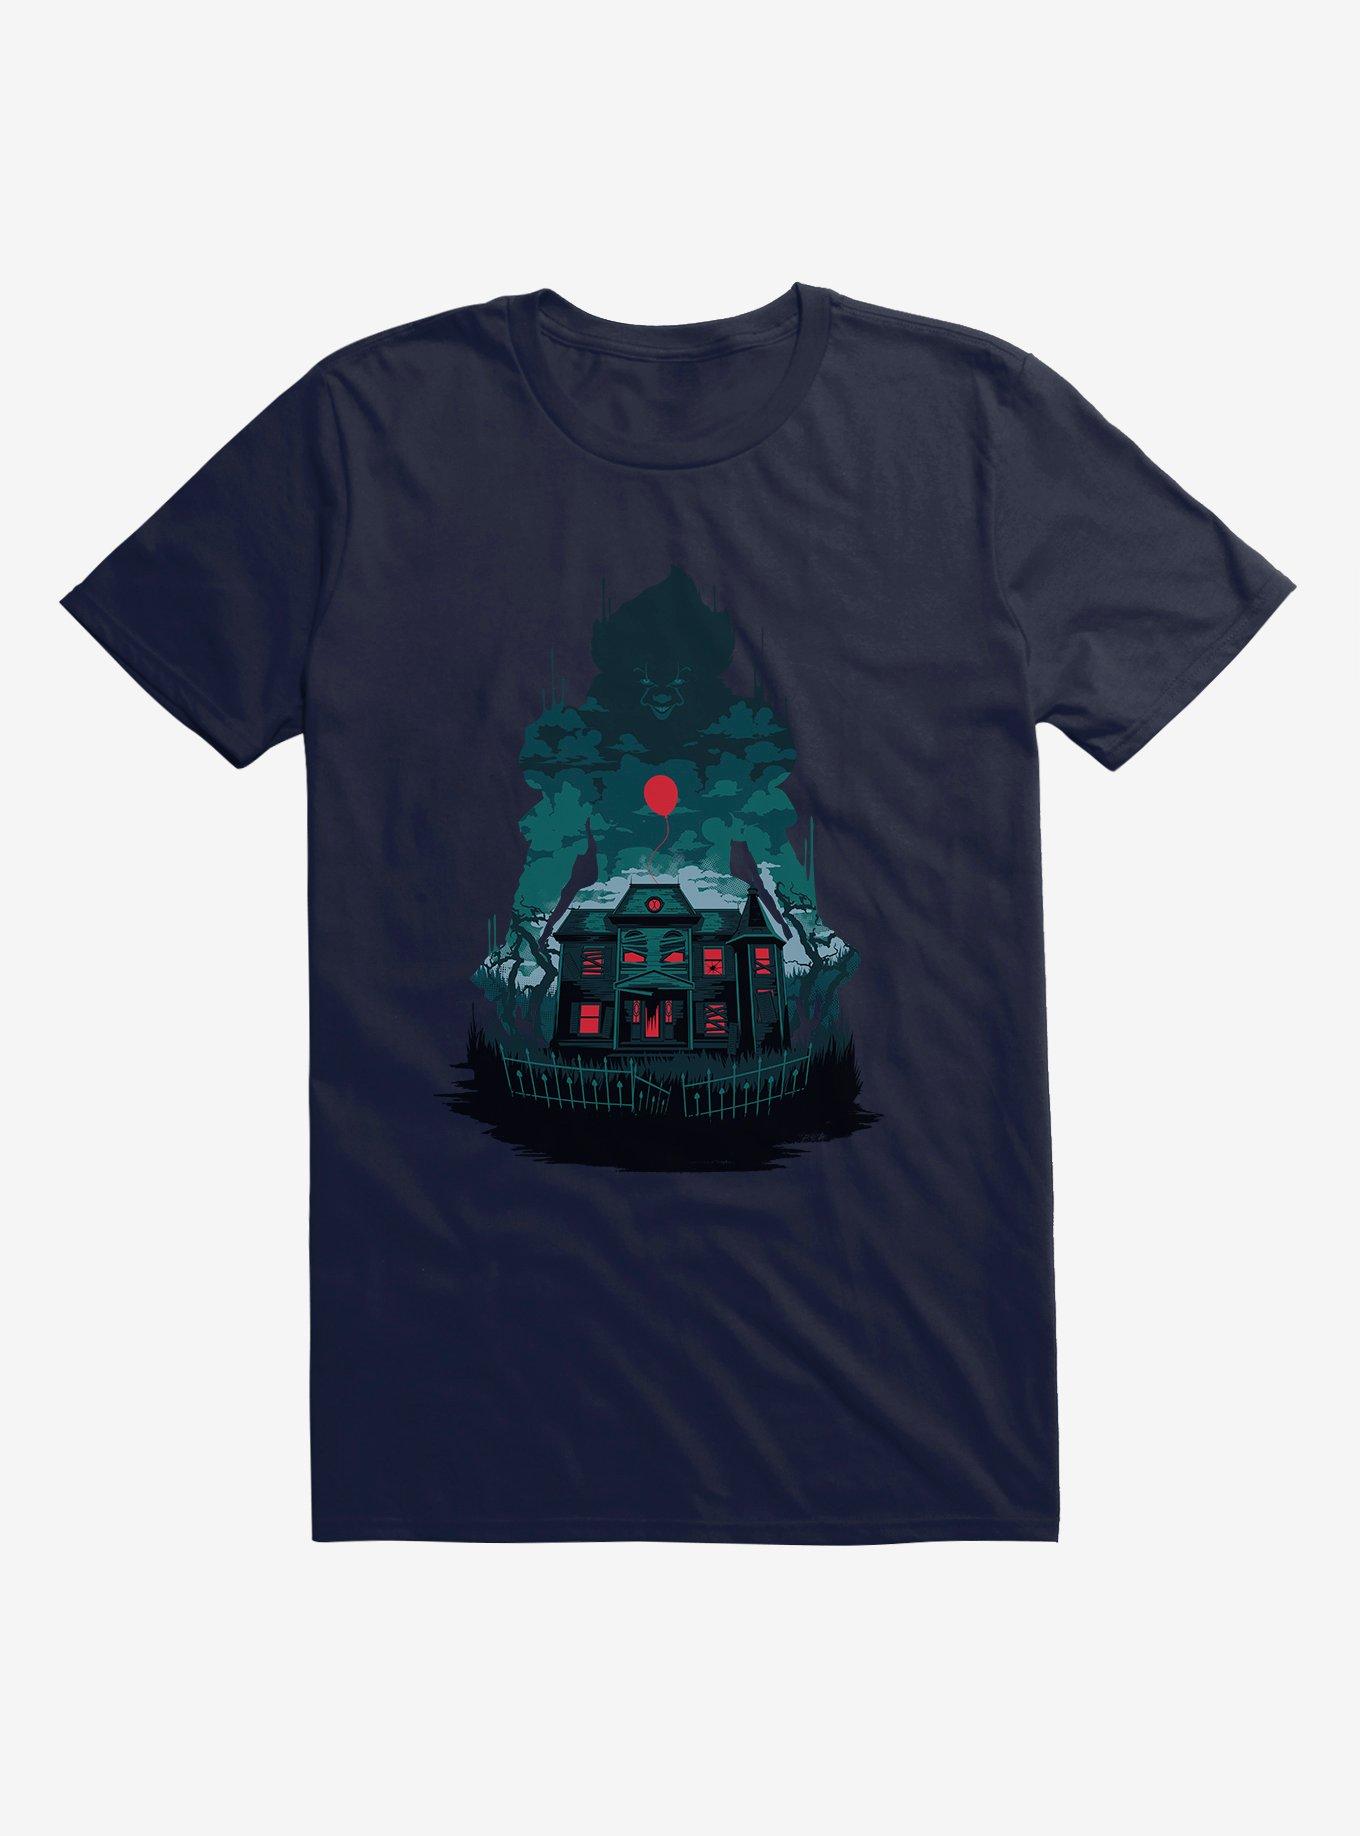 IT Chapter Two Haunted House T-Shirt, NAVY, hi-res